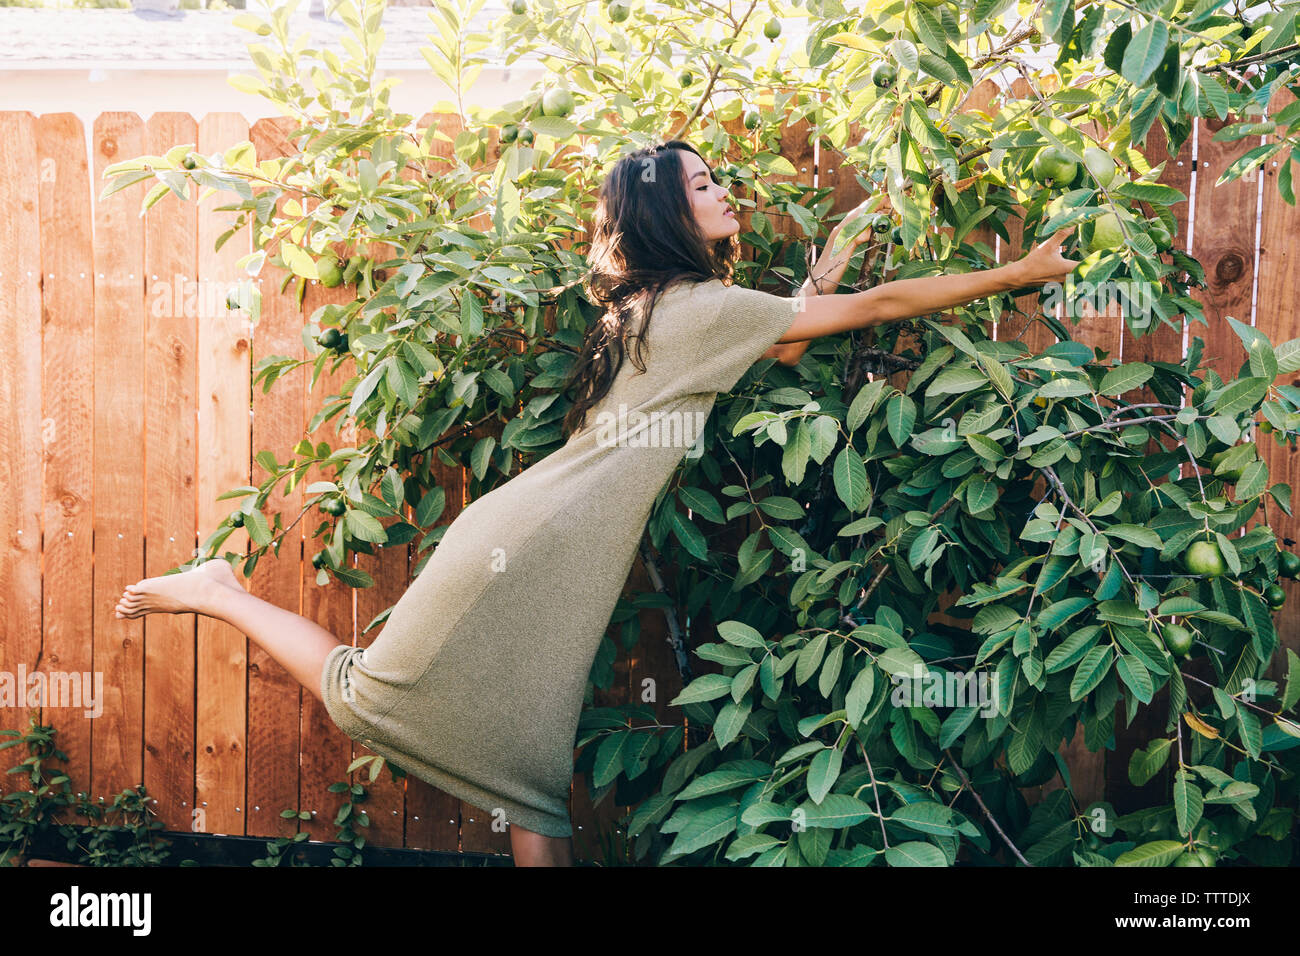 Side view of woman plucking fruit in backyard Stock Photo